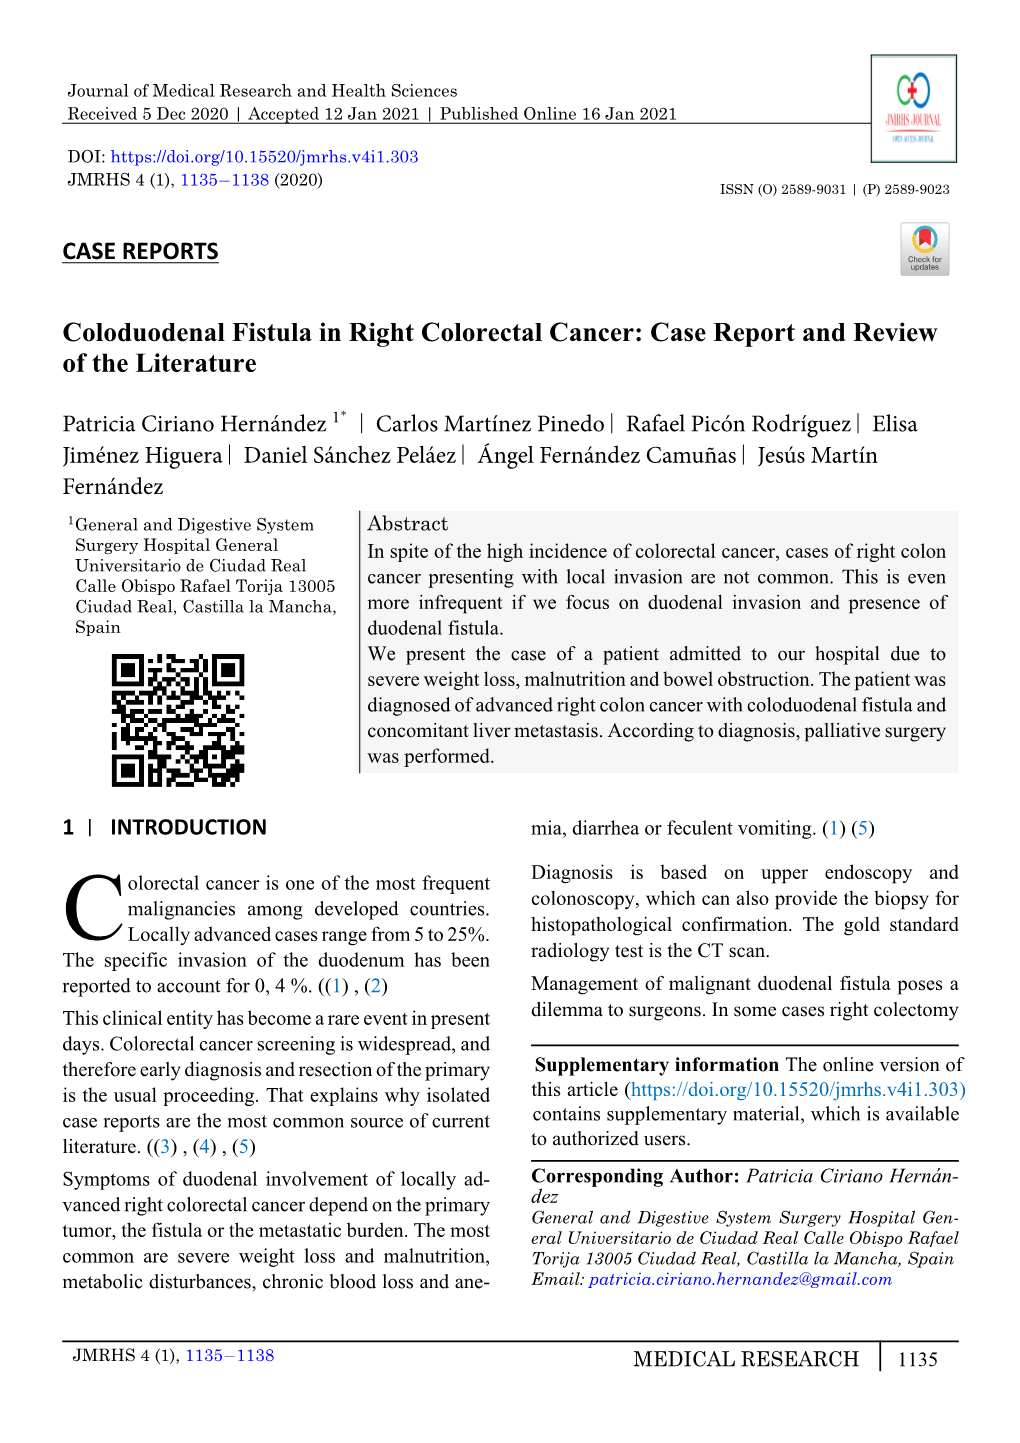 Coloduodenal Fistula in Right Colorectal Cancer: Case Report and Review of the Literature